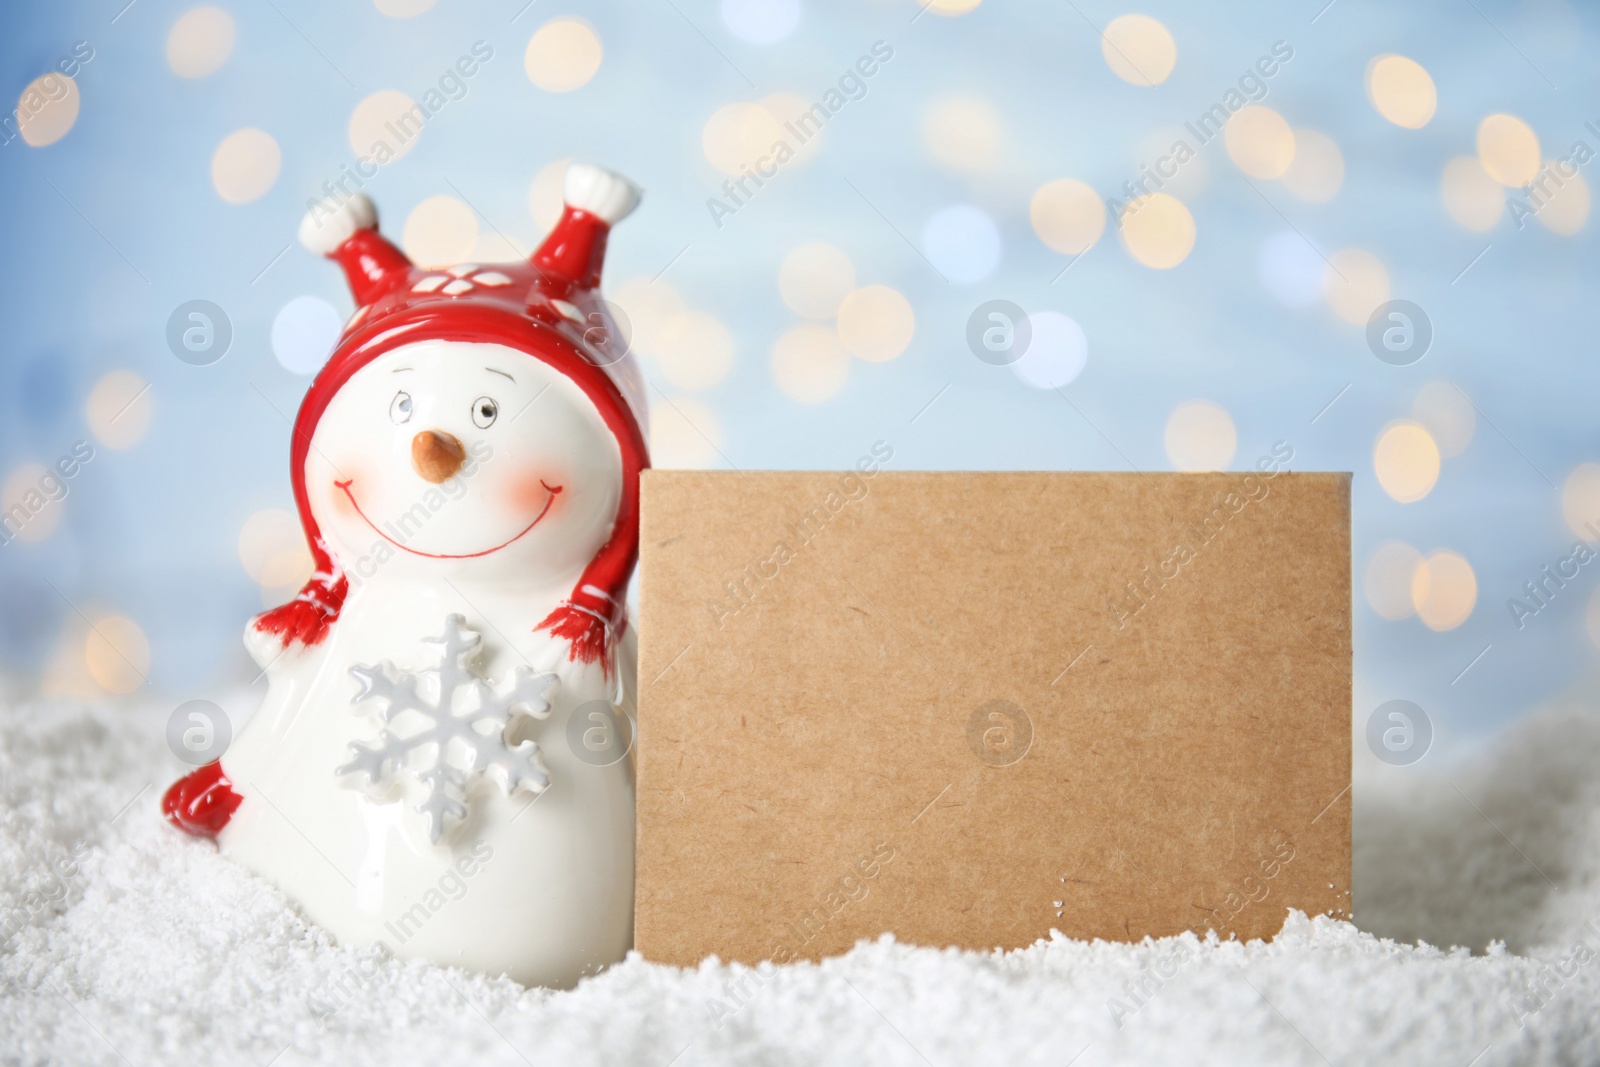 Photo of Decorative snowman near blank greeting card on artificial snow against blurred festive lights, space for text